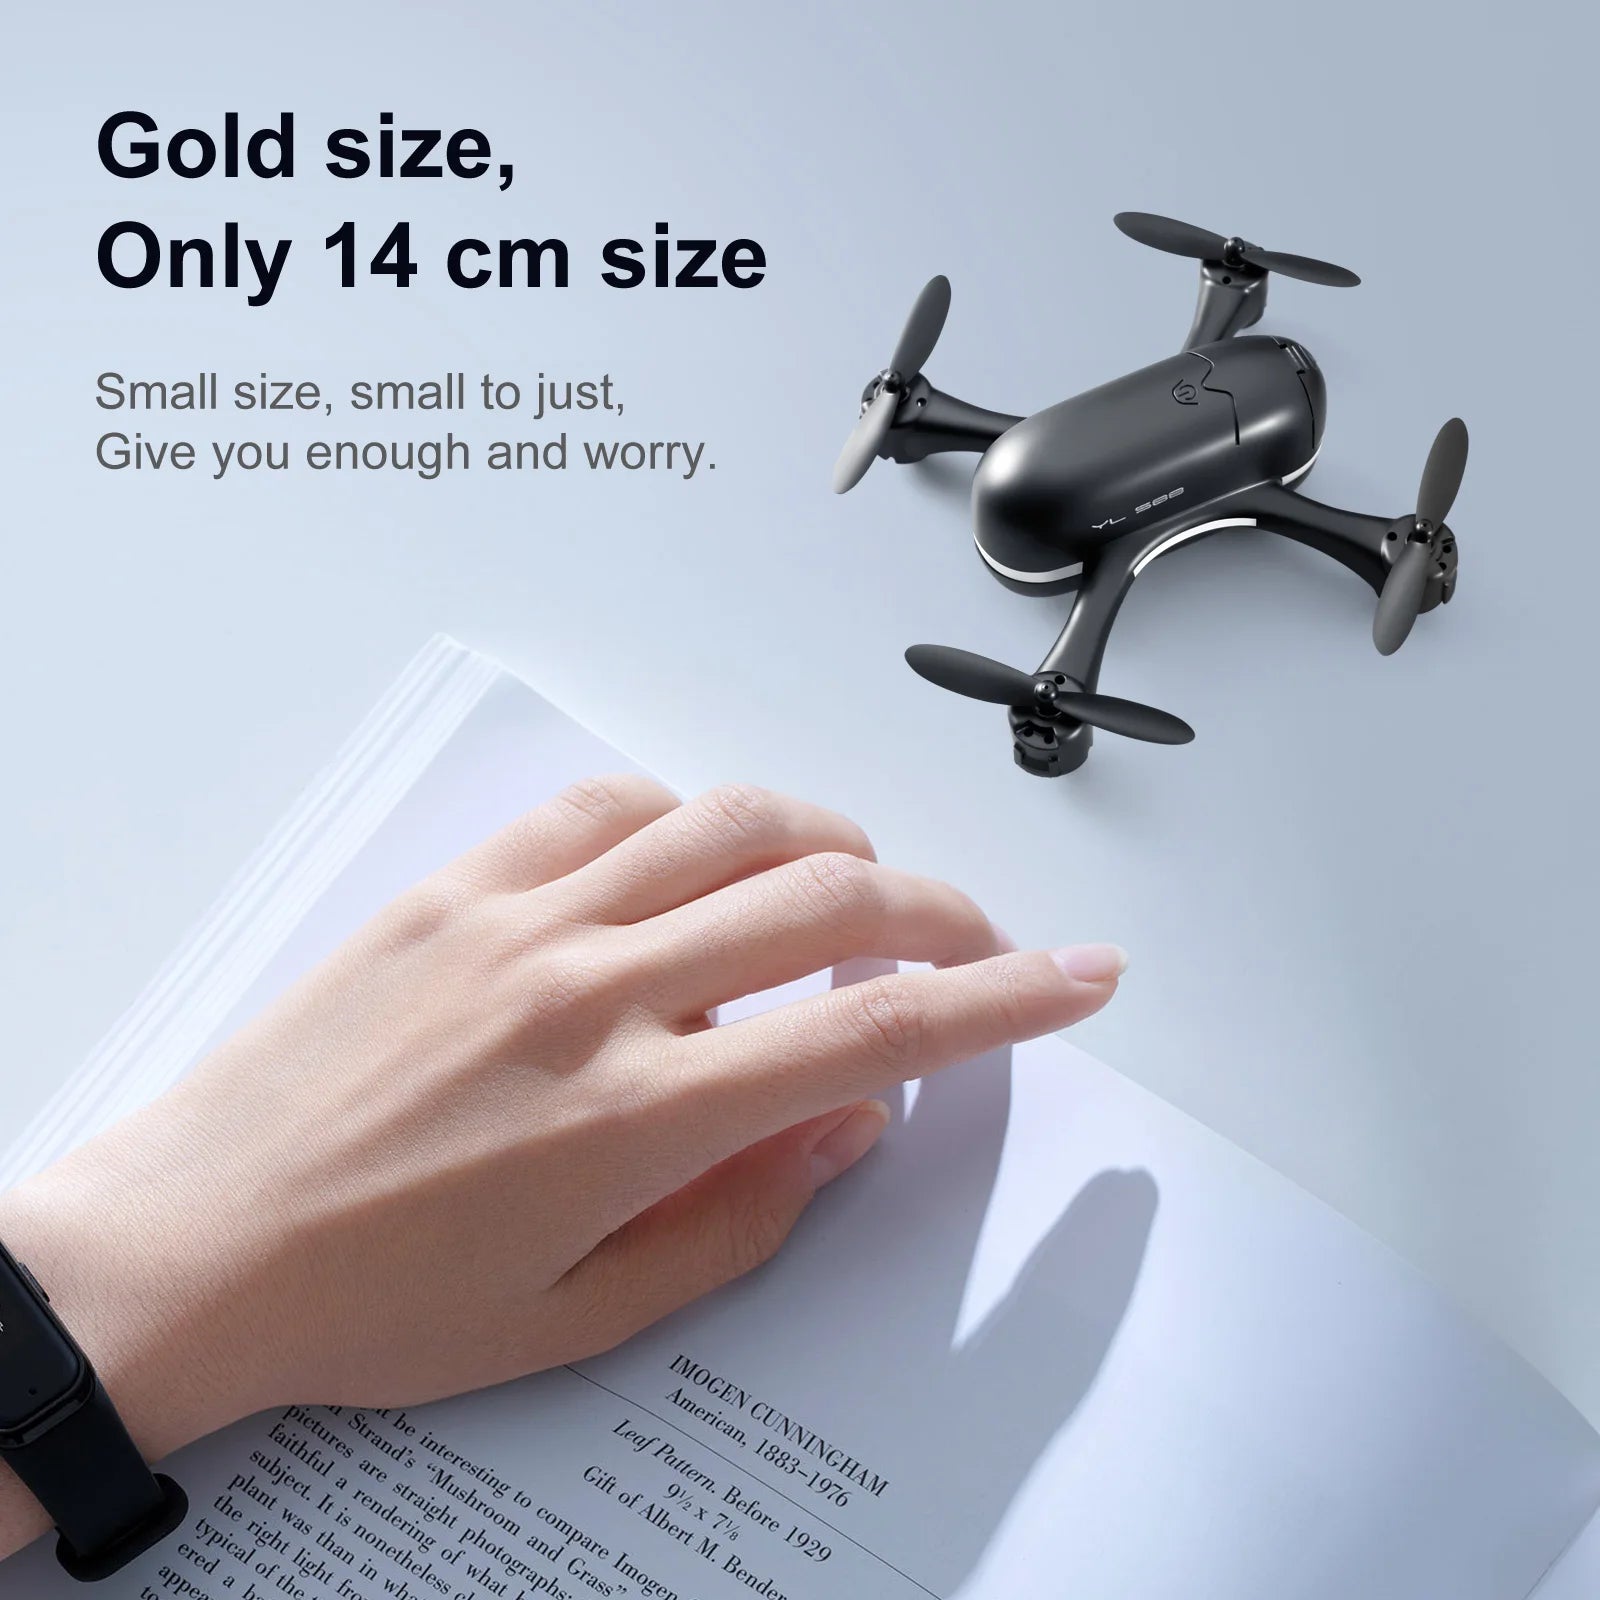 S88 Drone, gold size, Only 14 cm size Small size, small to just; Give you enough and worry